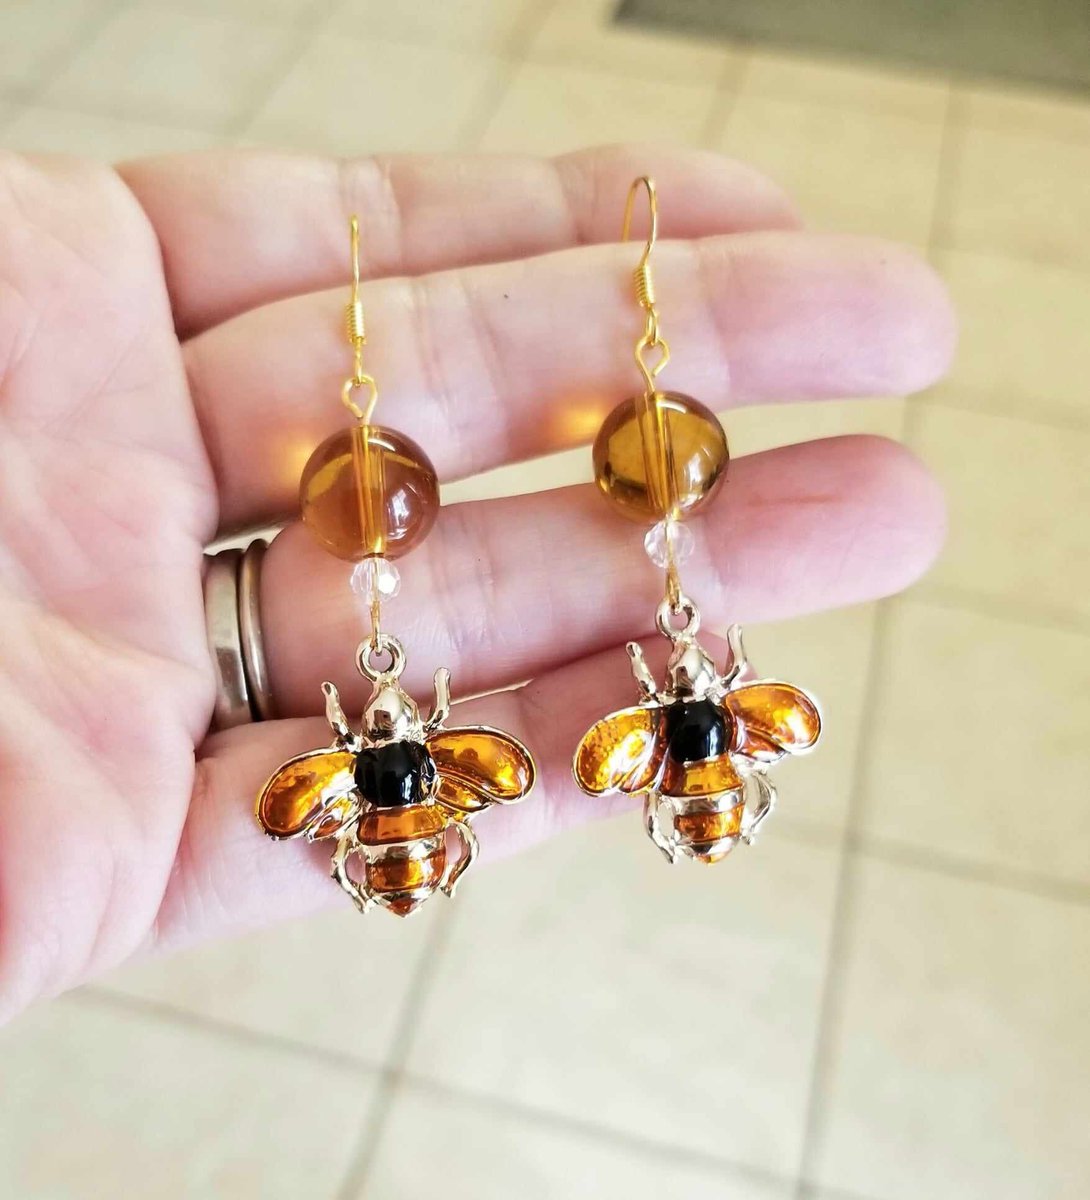 Amber Bumblebee Earrings 

#jewelry #earrings #fashion #style #womensfashion #goldearrings #giftsforher #giftideas #gifts #mothersday #mothersdaygifts #graduationgift #etsy #bee #bees #beejewelry #bumblebee 

simplychicbyangela.etsy.com/listing/167902…